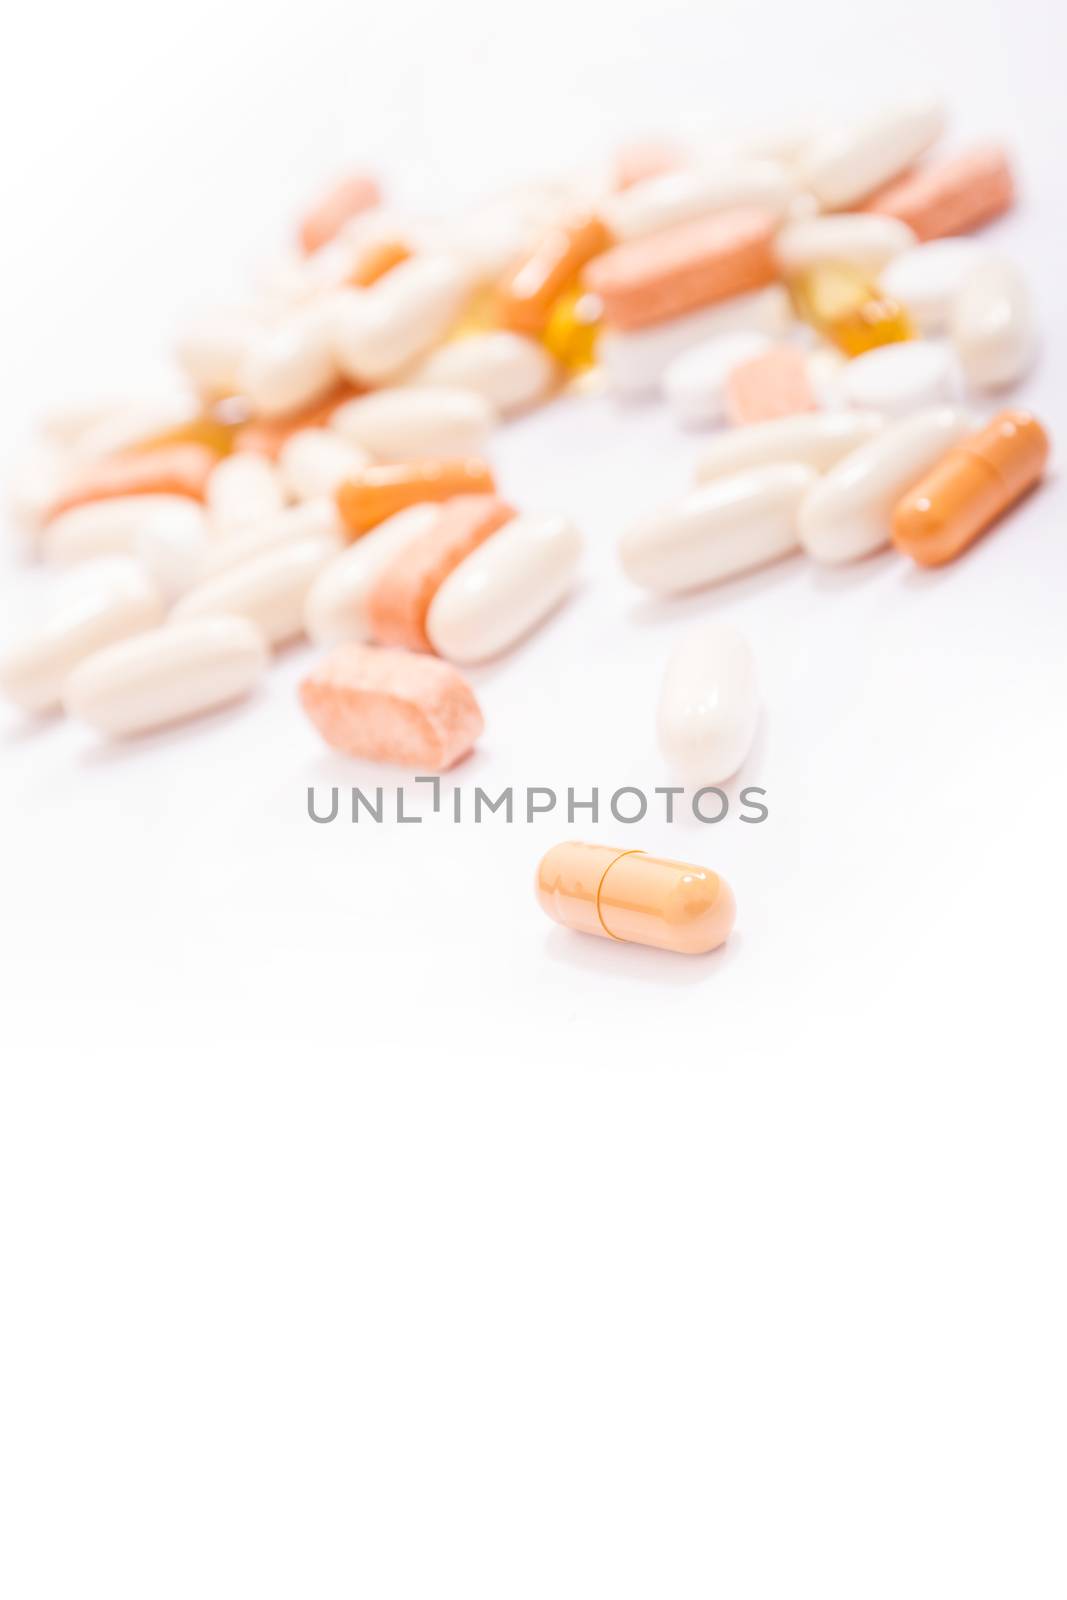 Various pharmaceutical pills and capsules.